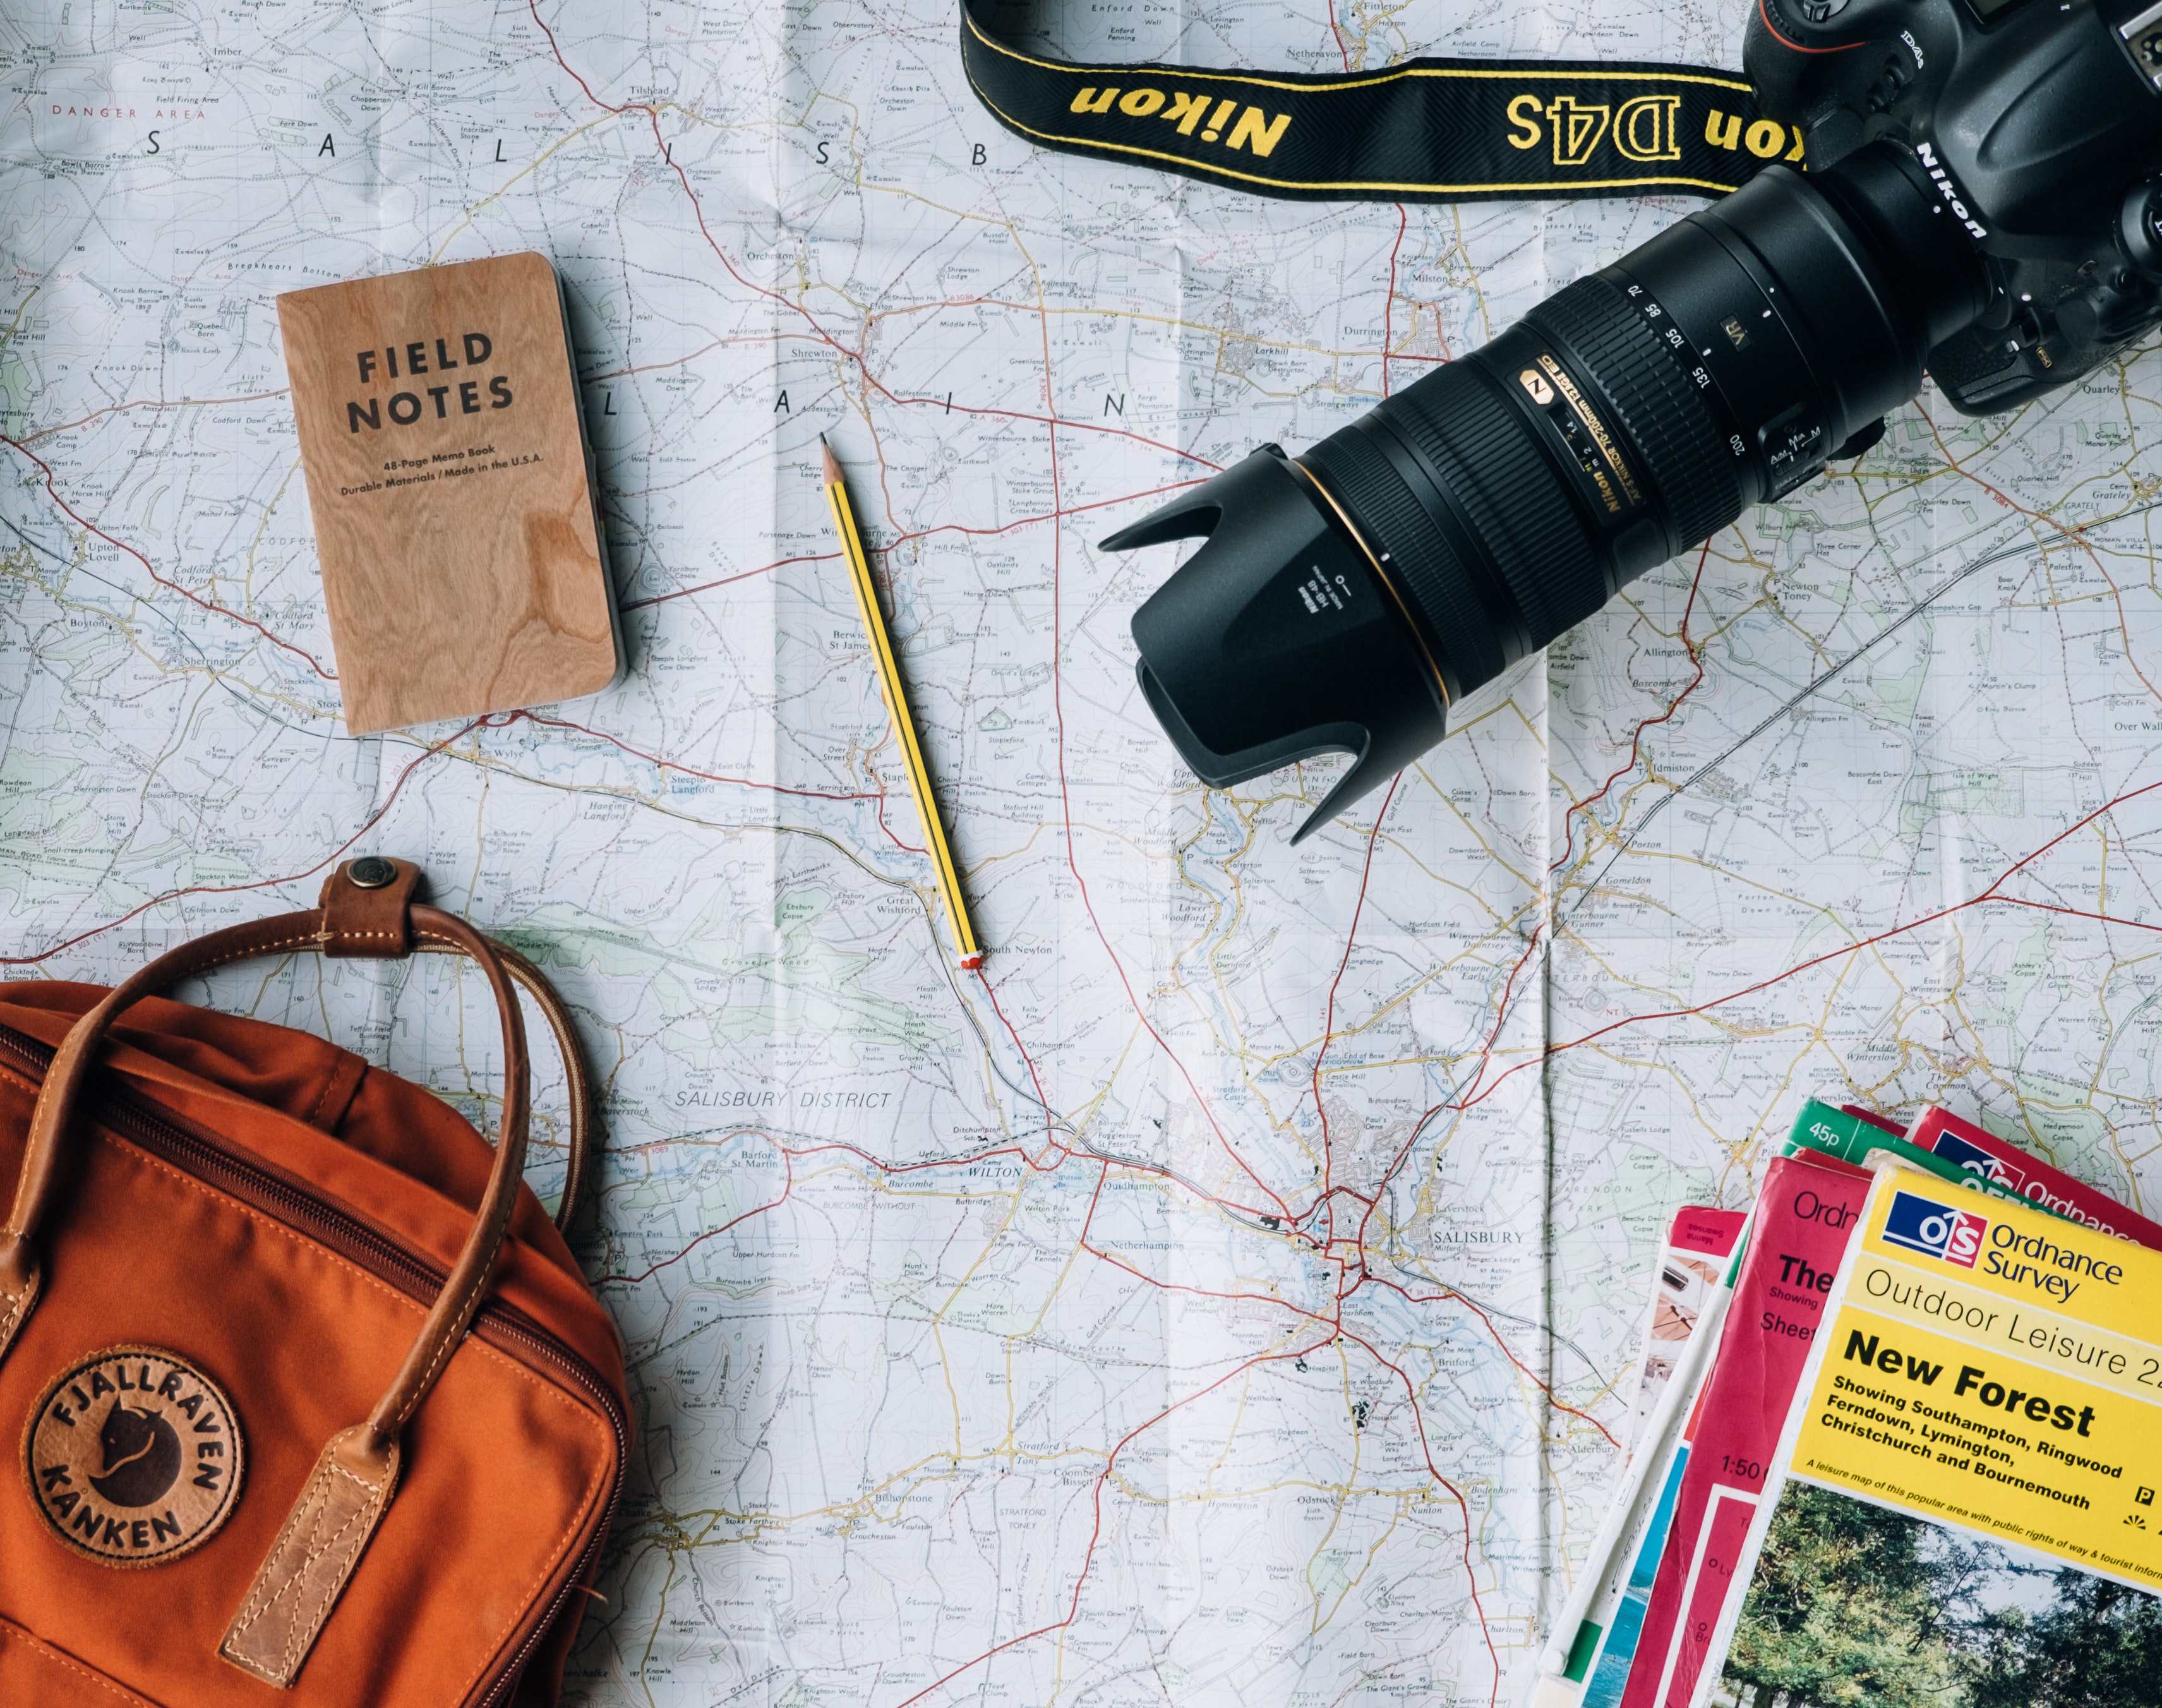 map with a camera, pensil, bag, and note book